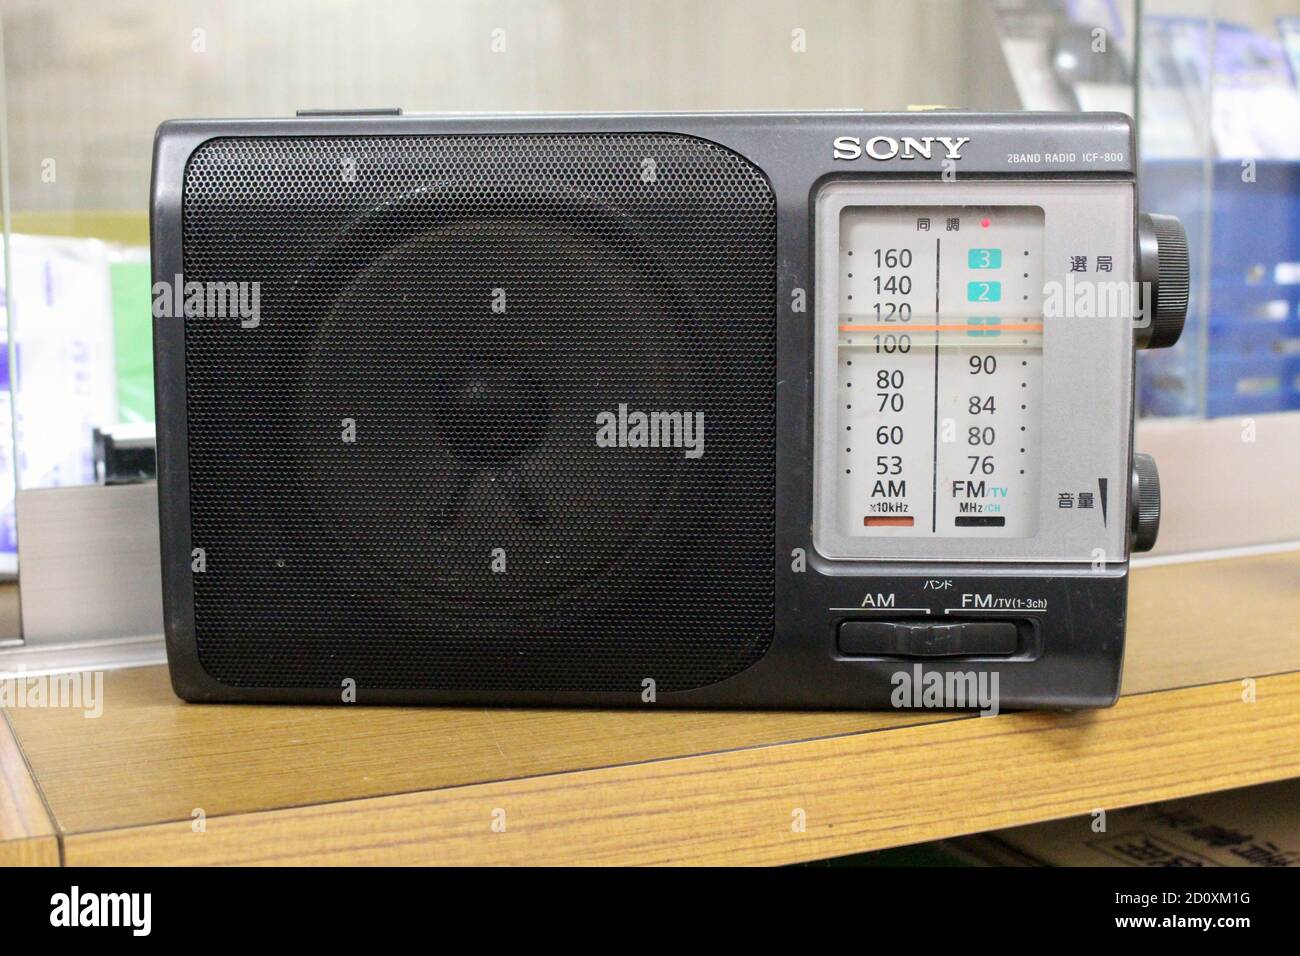 Old time radio, Japanese vintage product, Sony branded Stock Photo Alamy